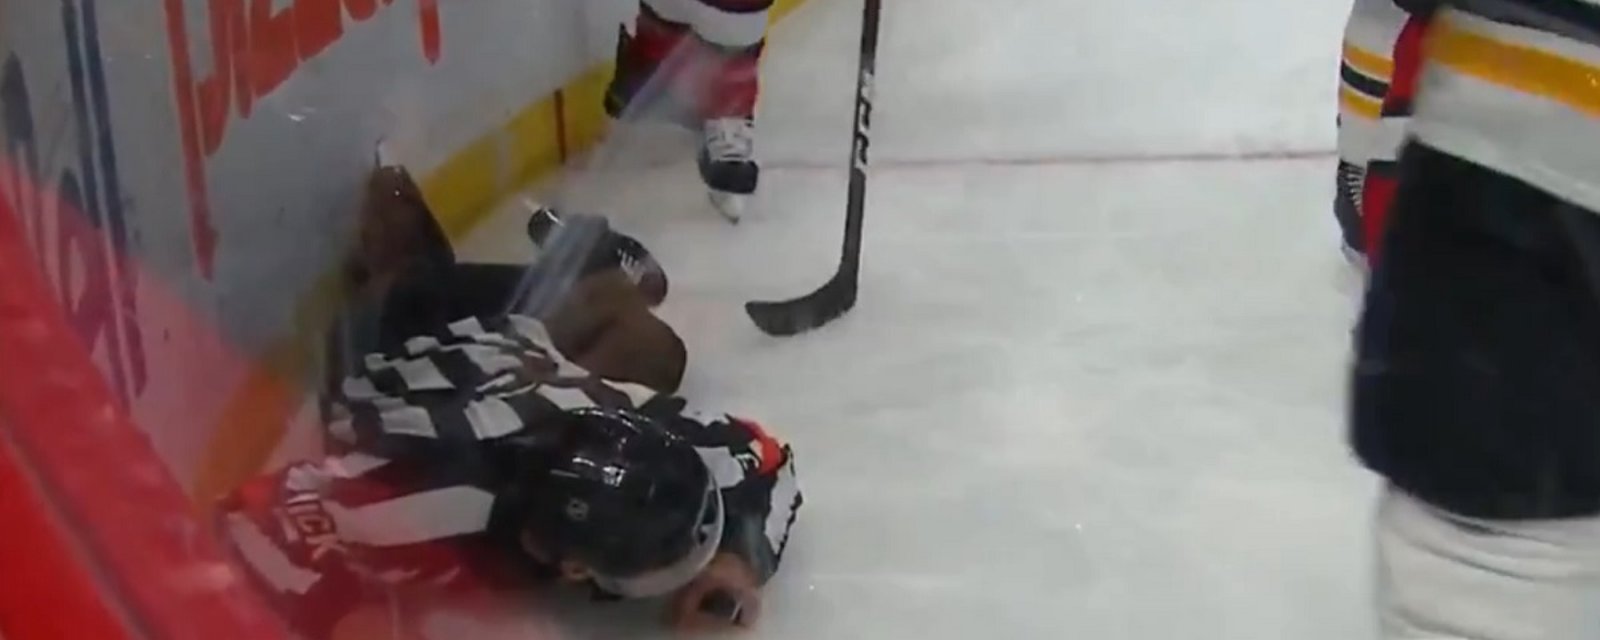 Brad Marchand takes out an NHL official after a big hit.